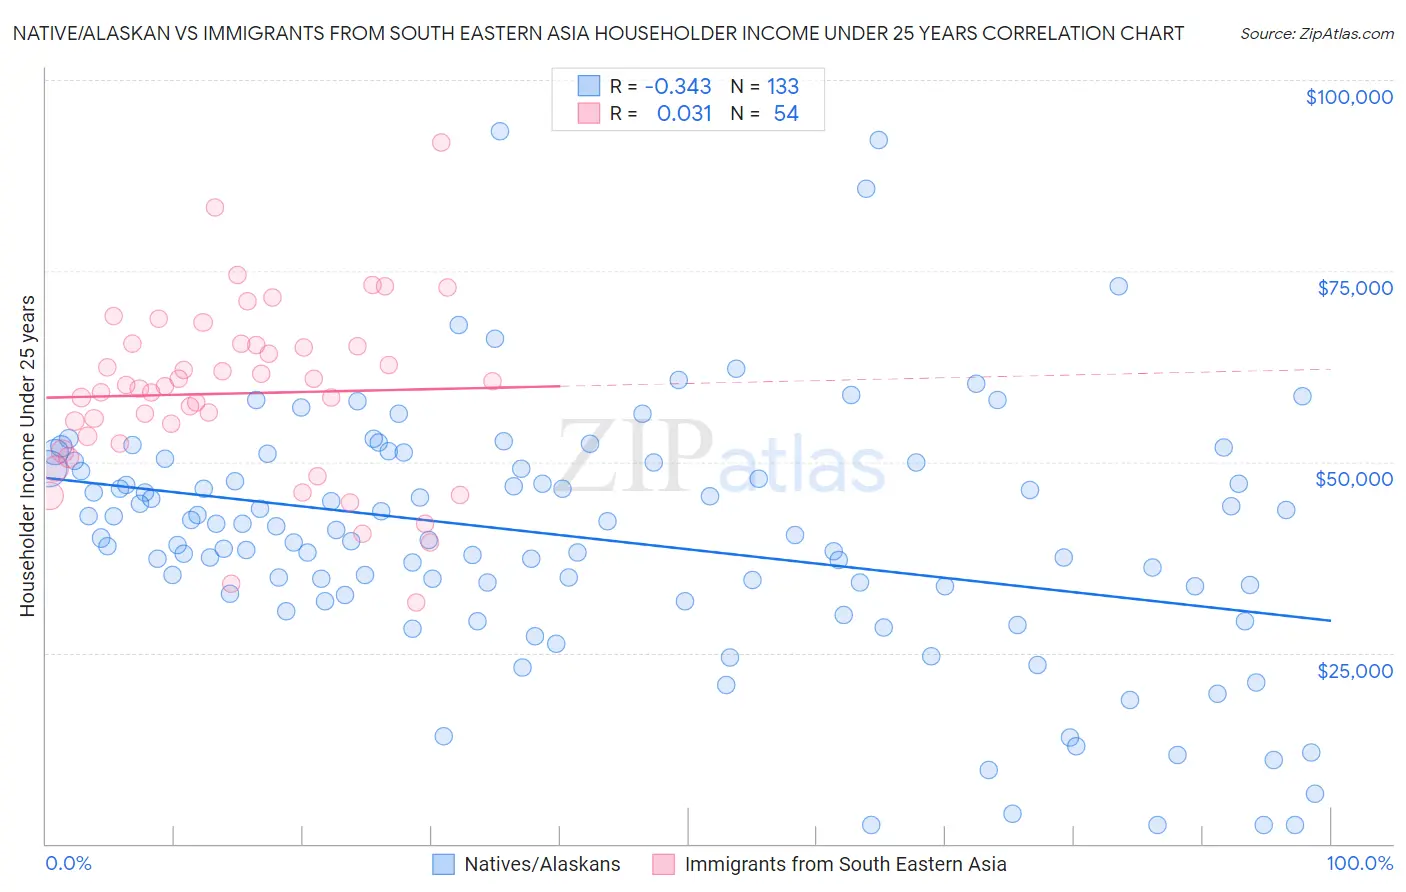 Native/Alaskan vs Immigrants from South Eastern Asia Householder Income Under 25 years